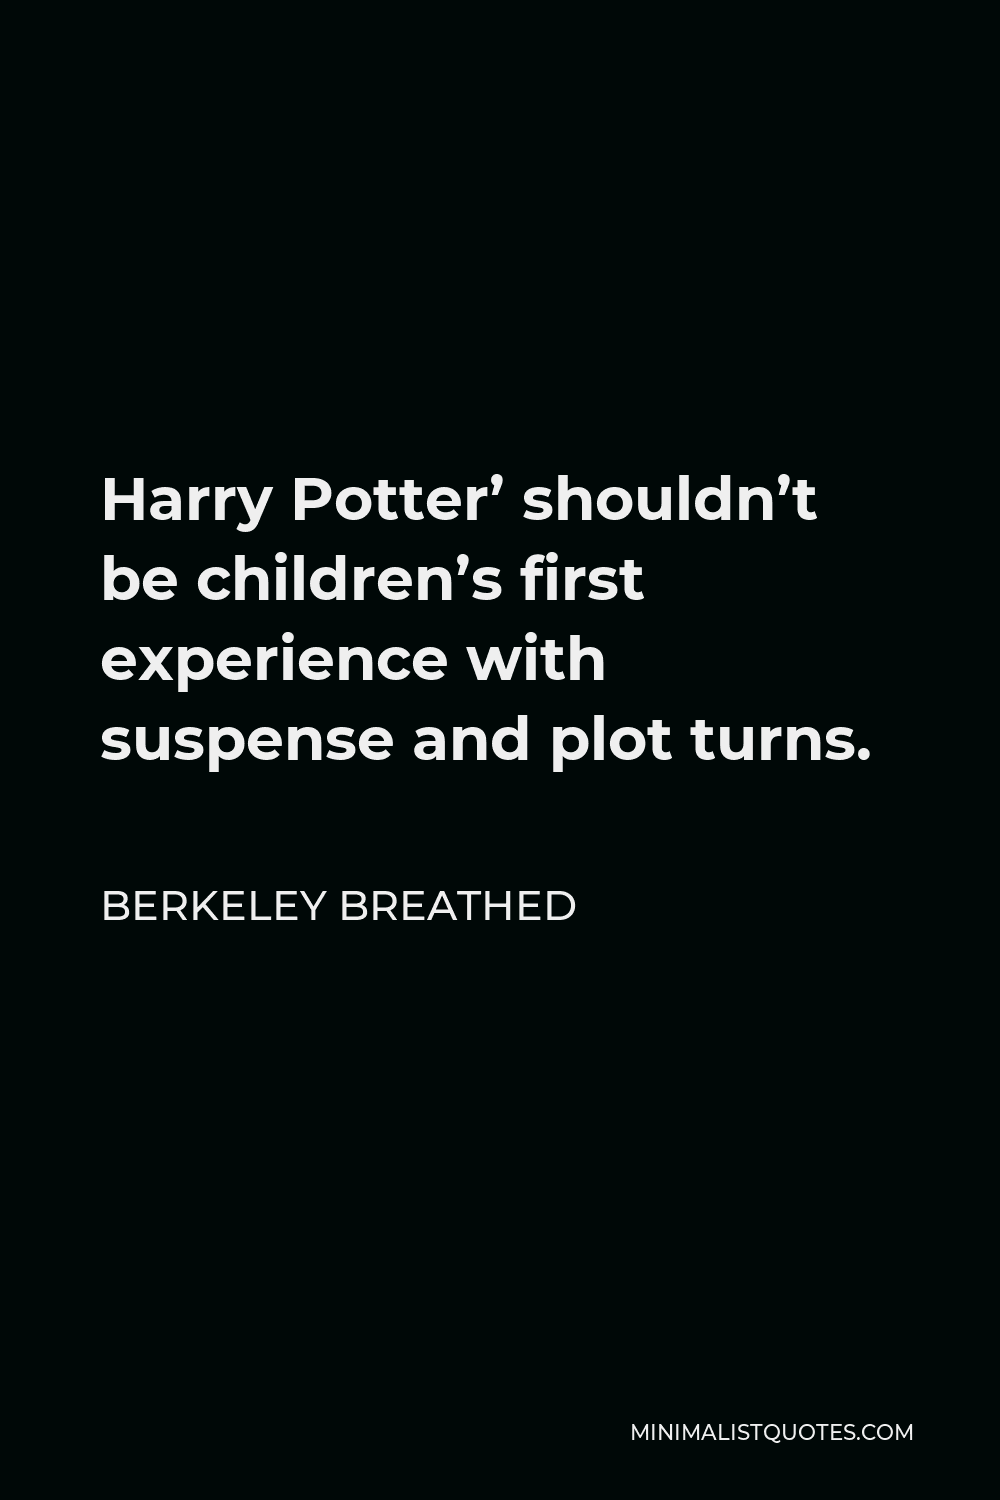 Berkeley Breathed Quote - Harry Potter’ shouldn’t be children’s first experience with suspense and plot turns.